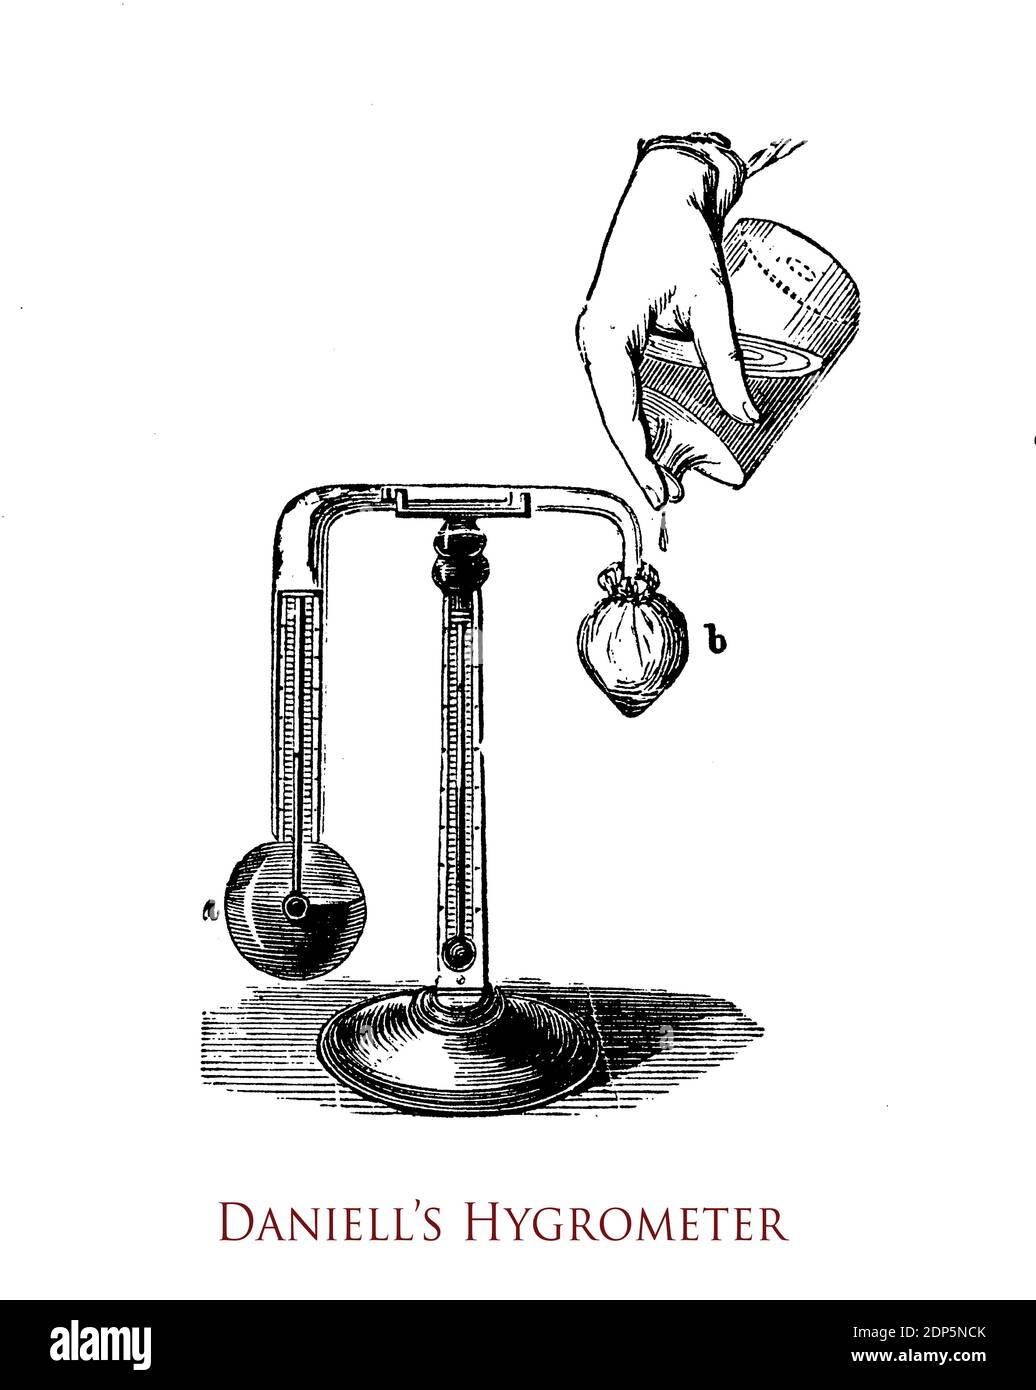 Daniell's hygrometer measures the air humidity, it consists of a  thermometer and two glass balls, one filled with ether vapors condensing  inside Stock Photo - Alamy